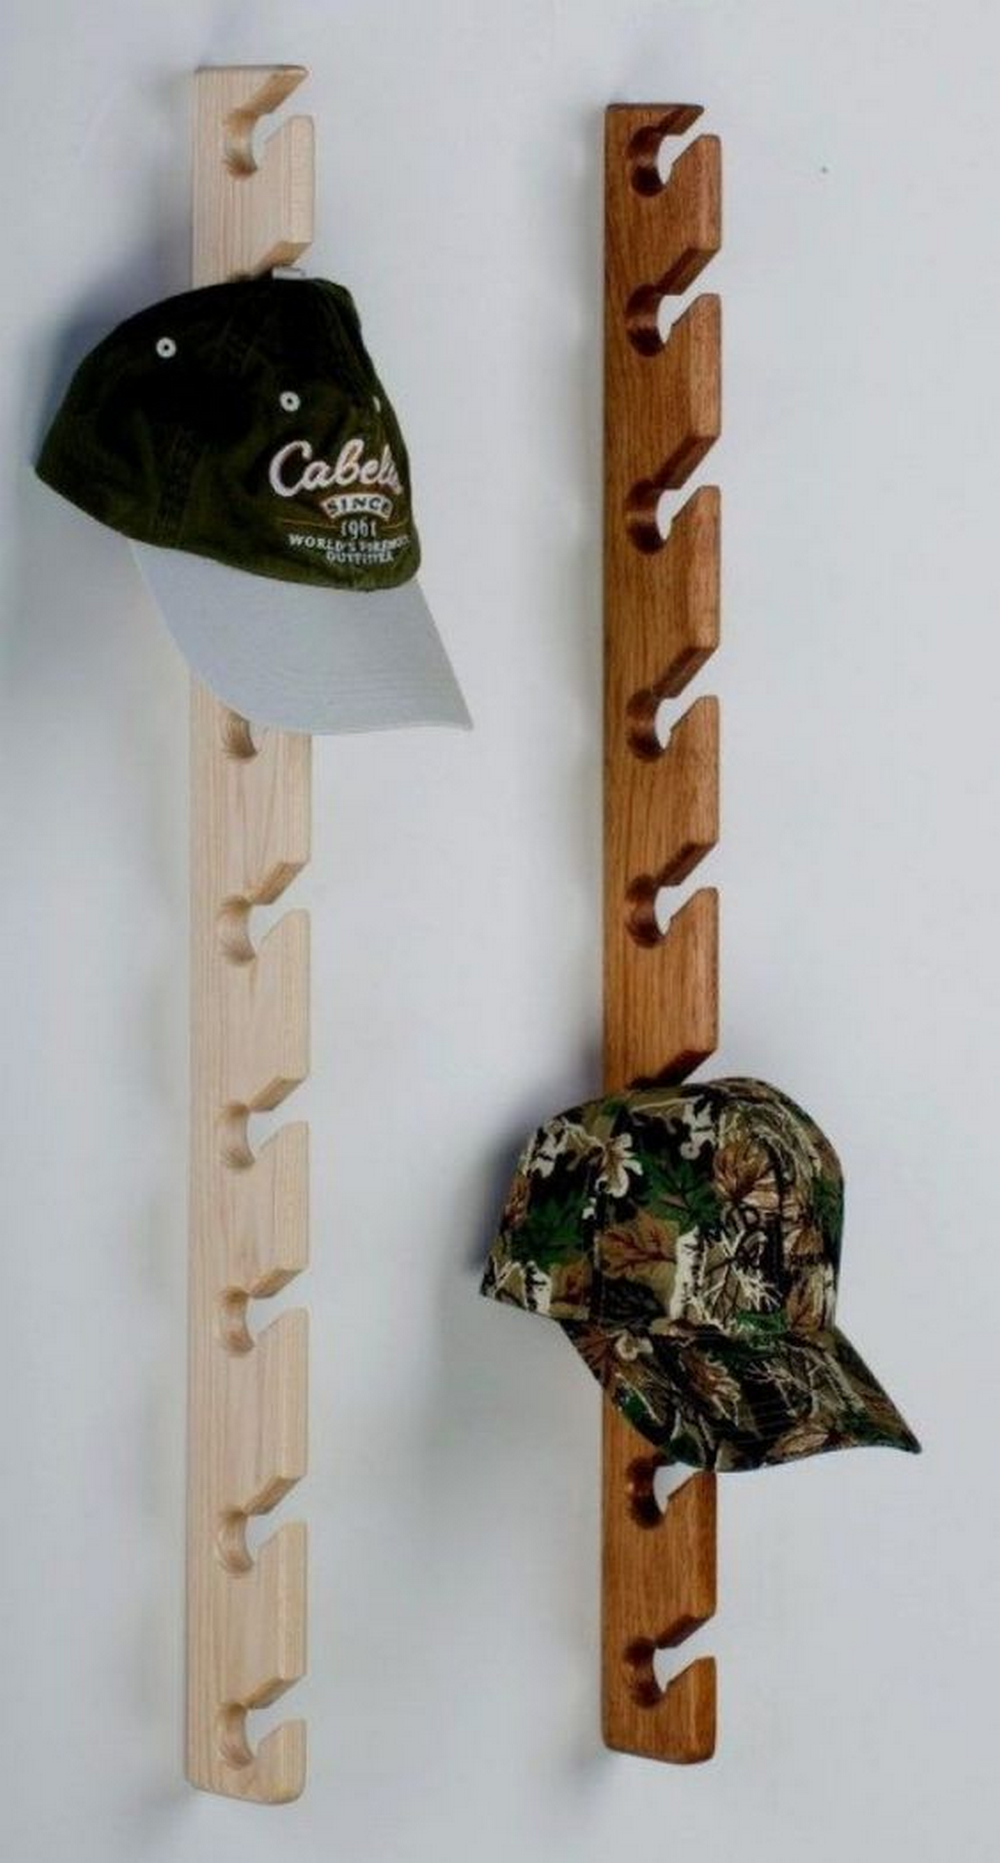 How To Build A Hat Rack DIY Hat Rack - DIY projects for everyone!